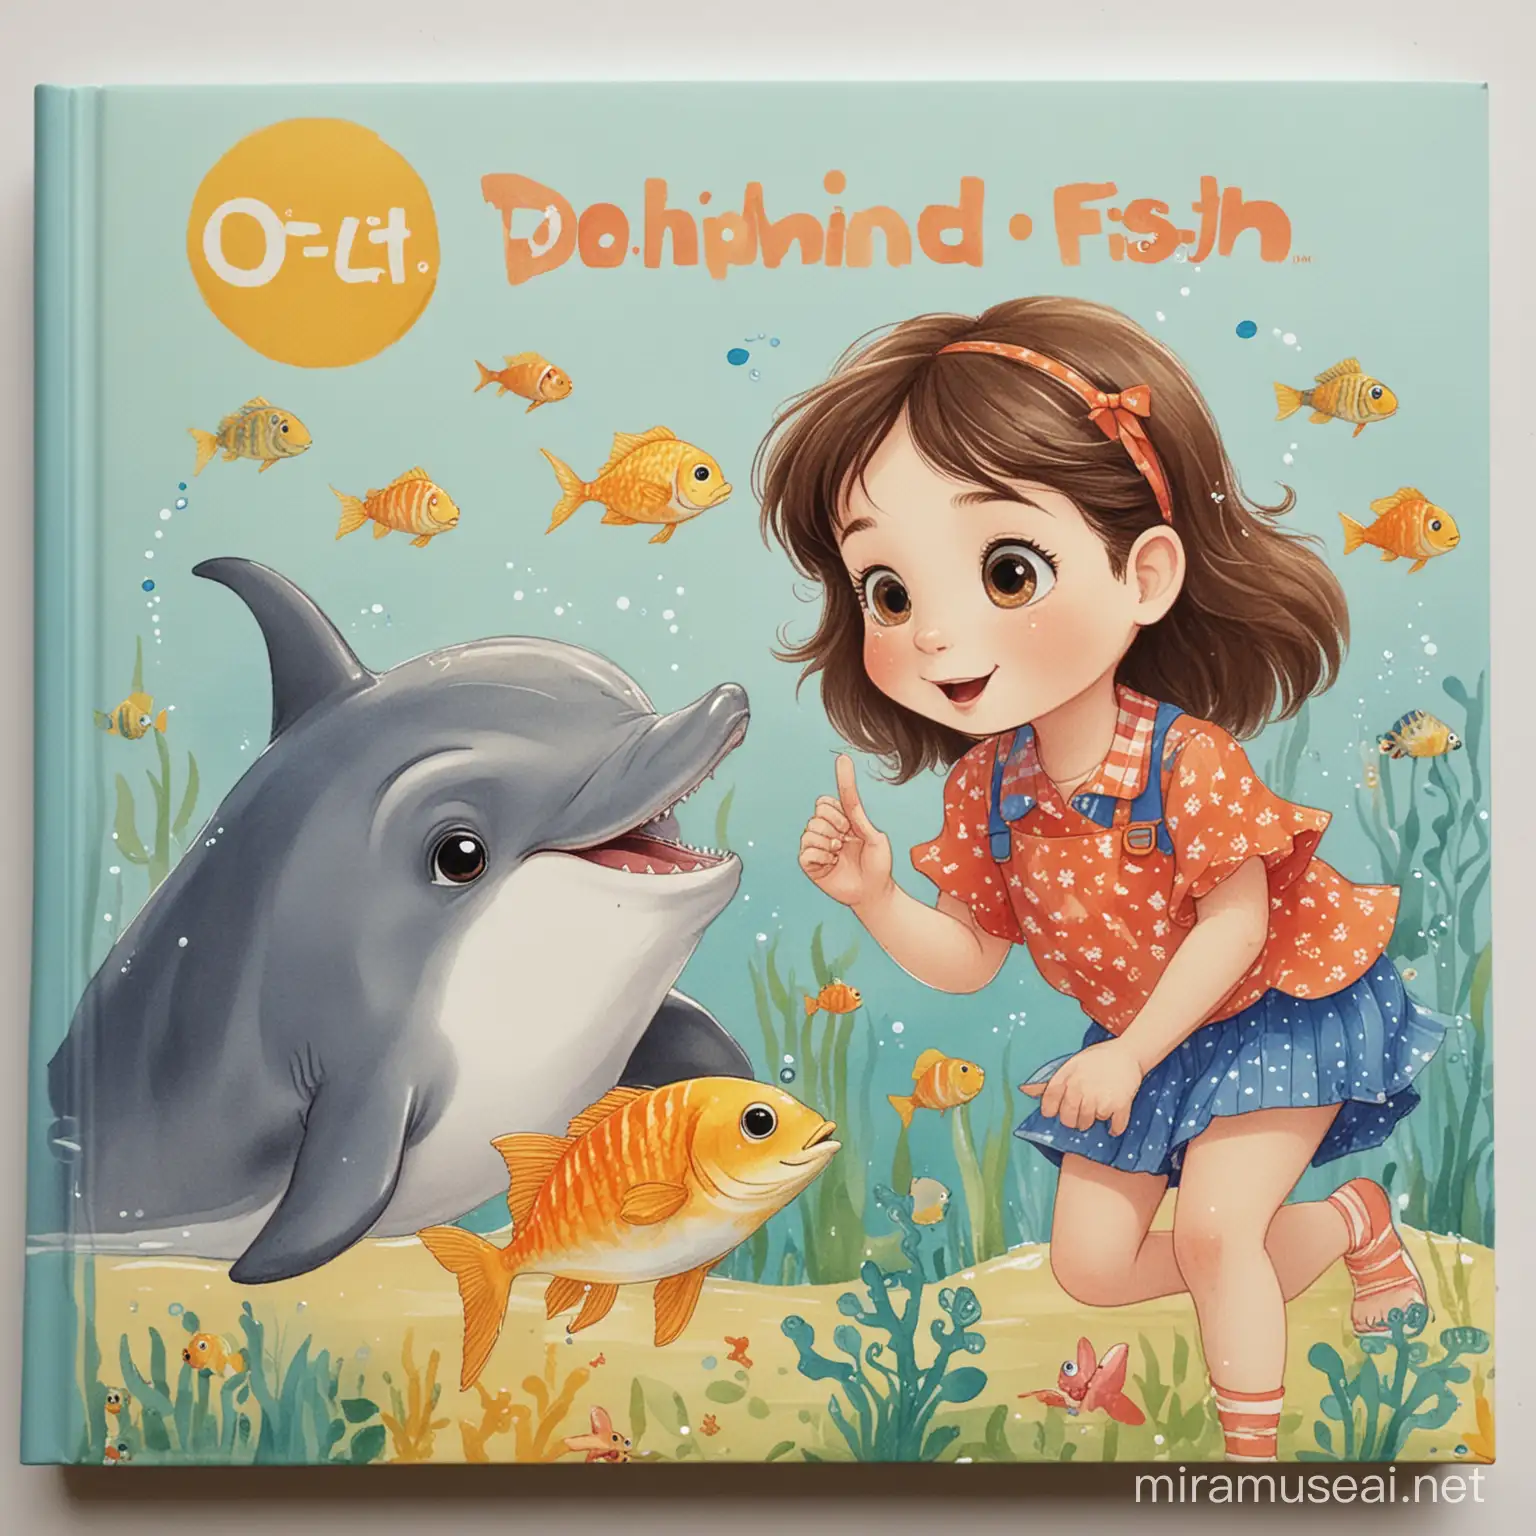 picture book for 2-year-old girl，dolphin and fish characters，taking about not watching too much TV